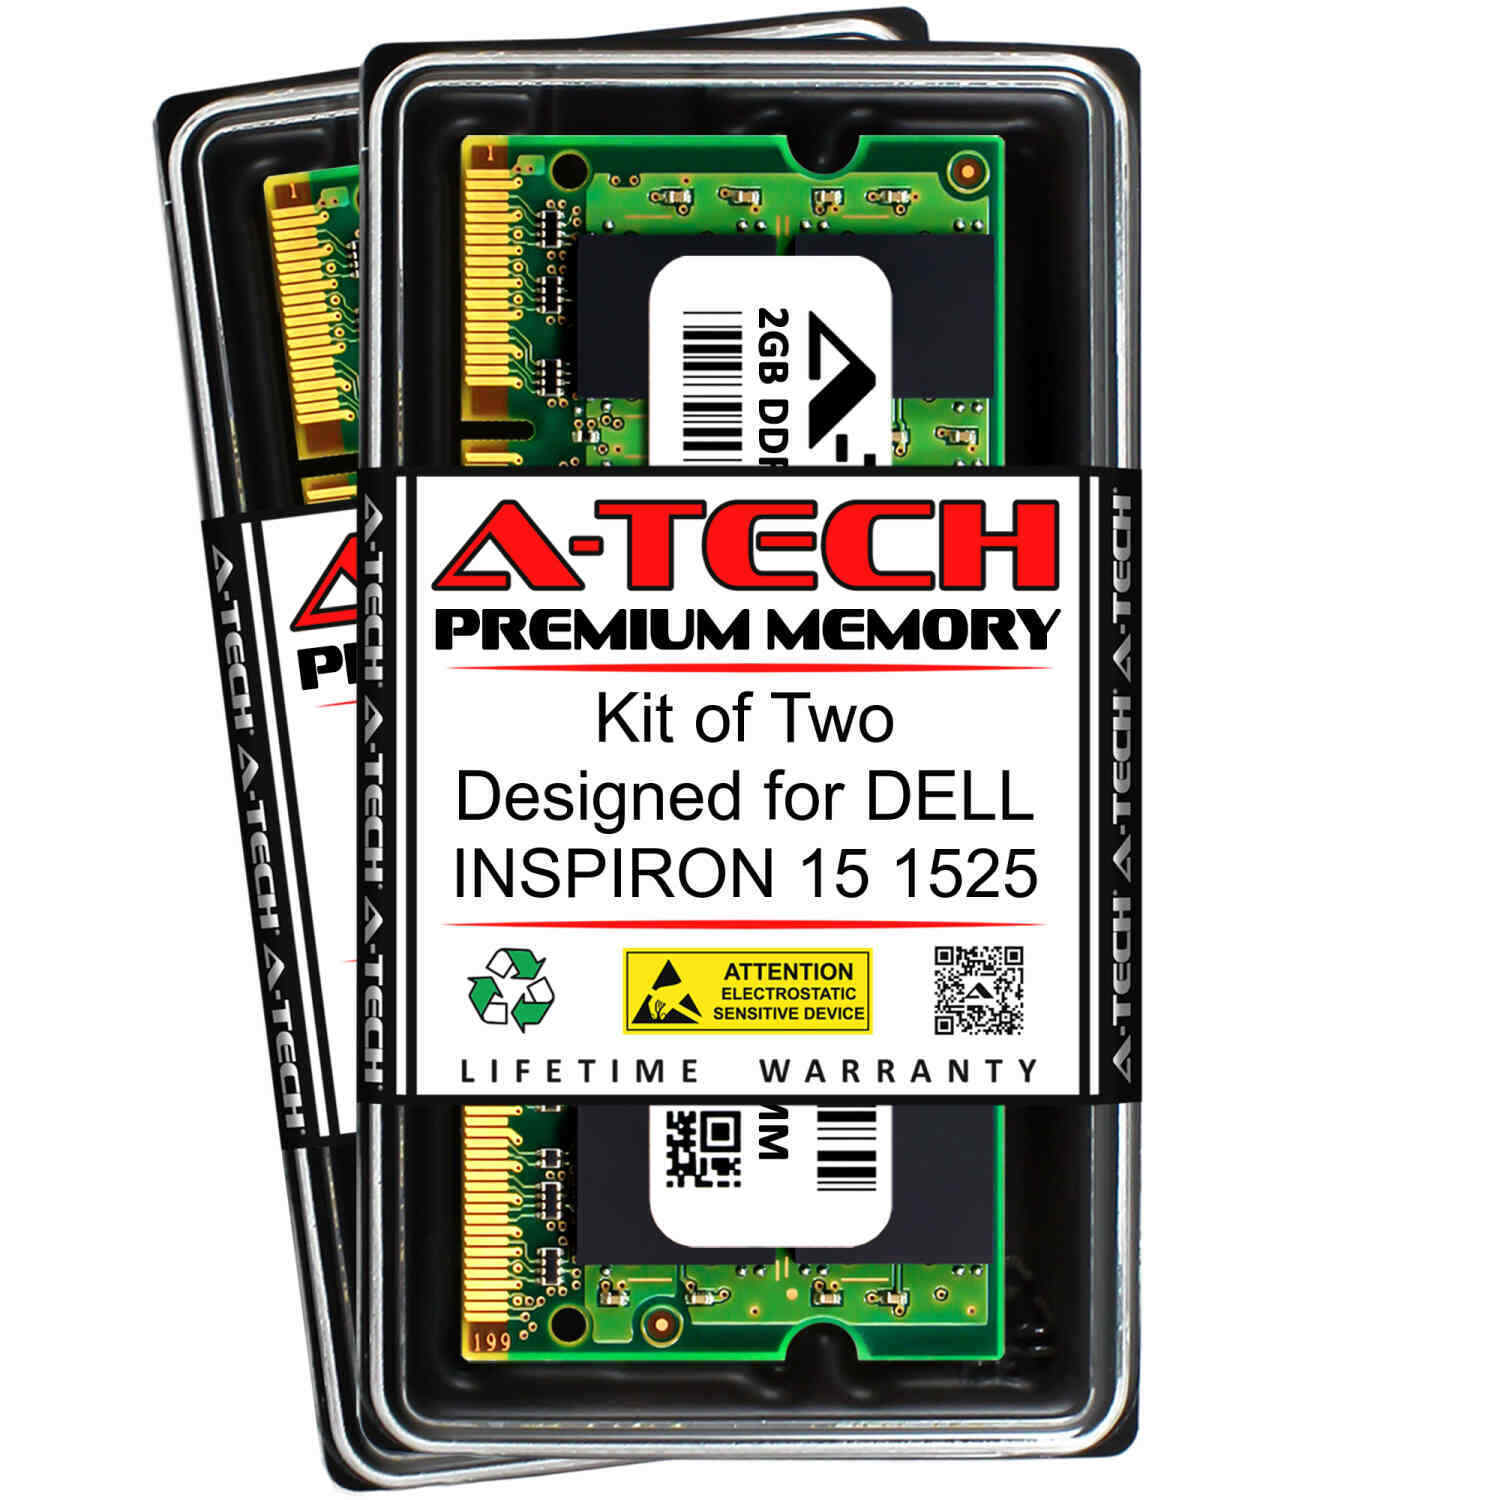 4GB 2x 2GB PC2-5300 DDR2 667 MHz Memory RAM for DELL INSPIRON 15 1525